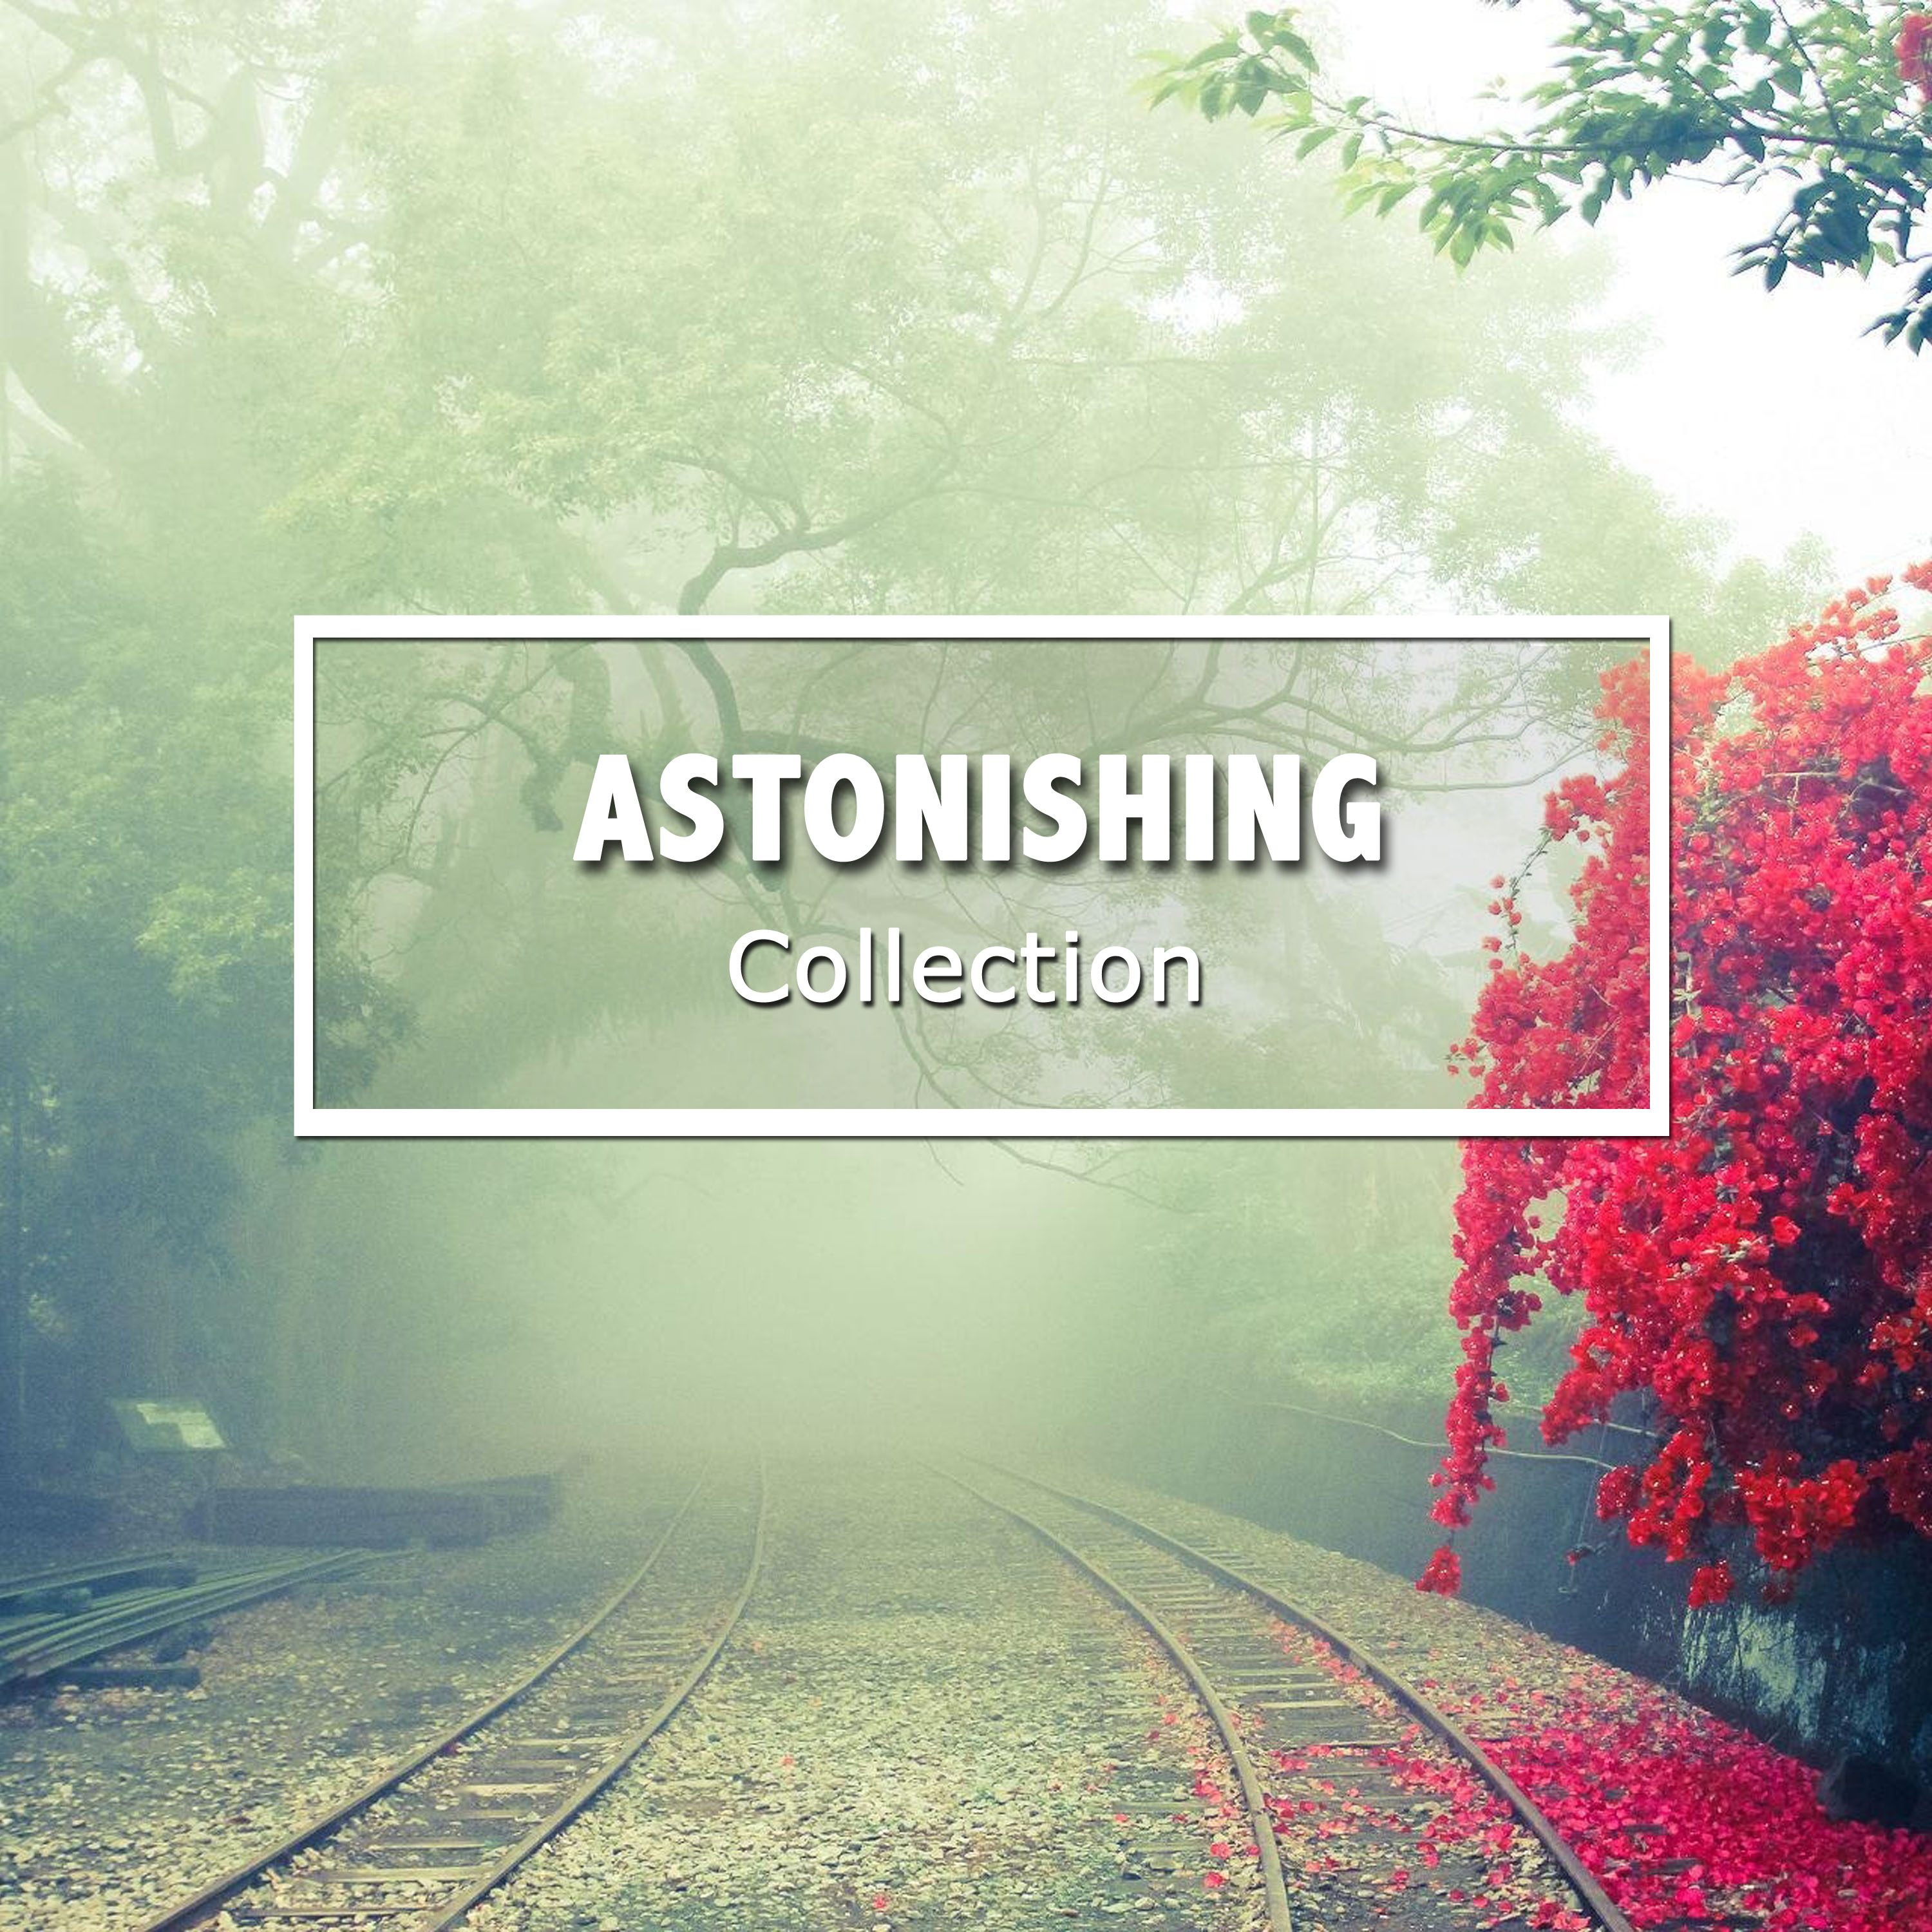 #20 Astonishing Collection for Spa & Relaxation